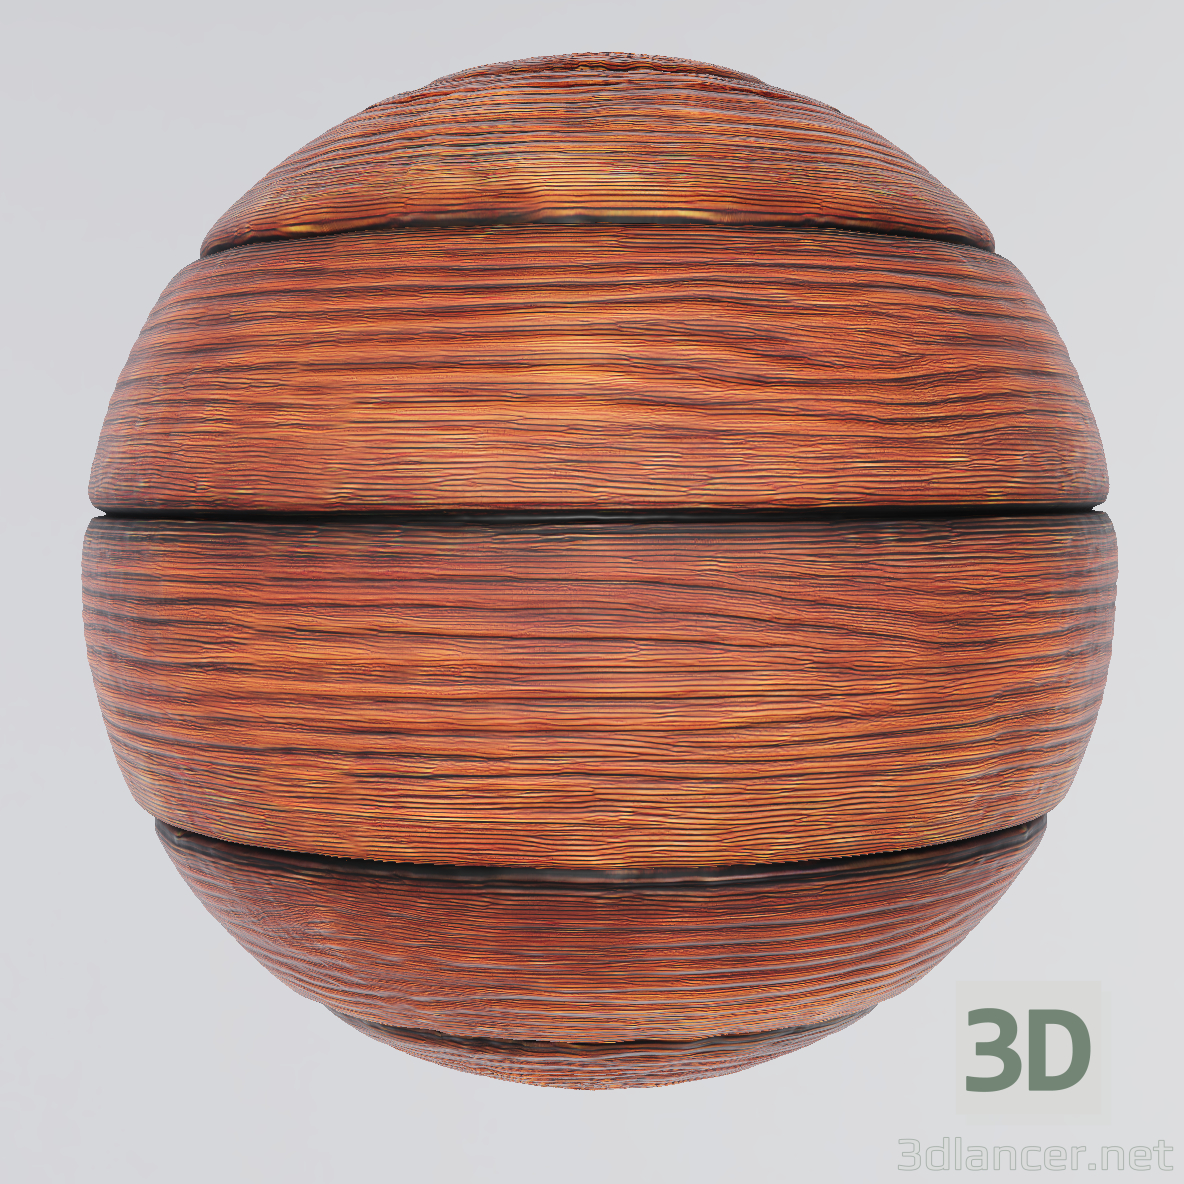 Wooden planks 3 buy texture for 3d max